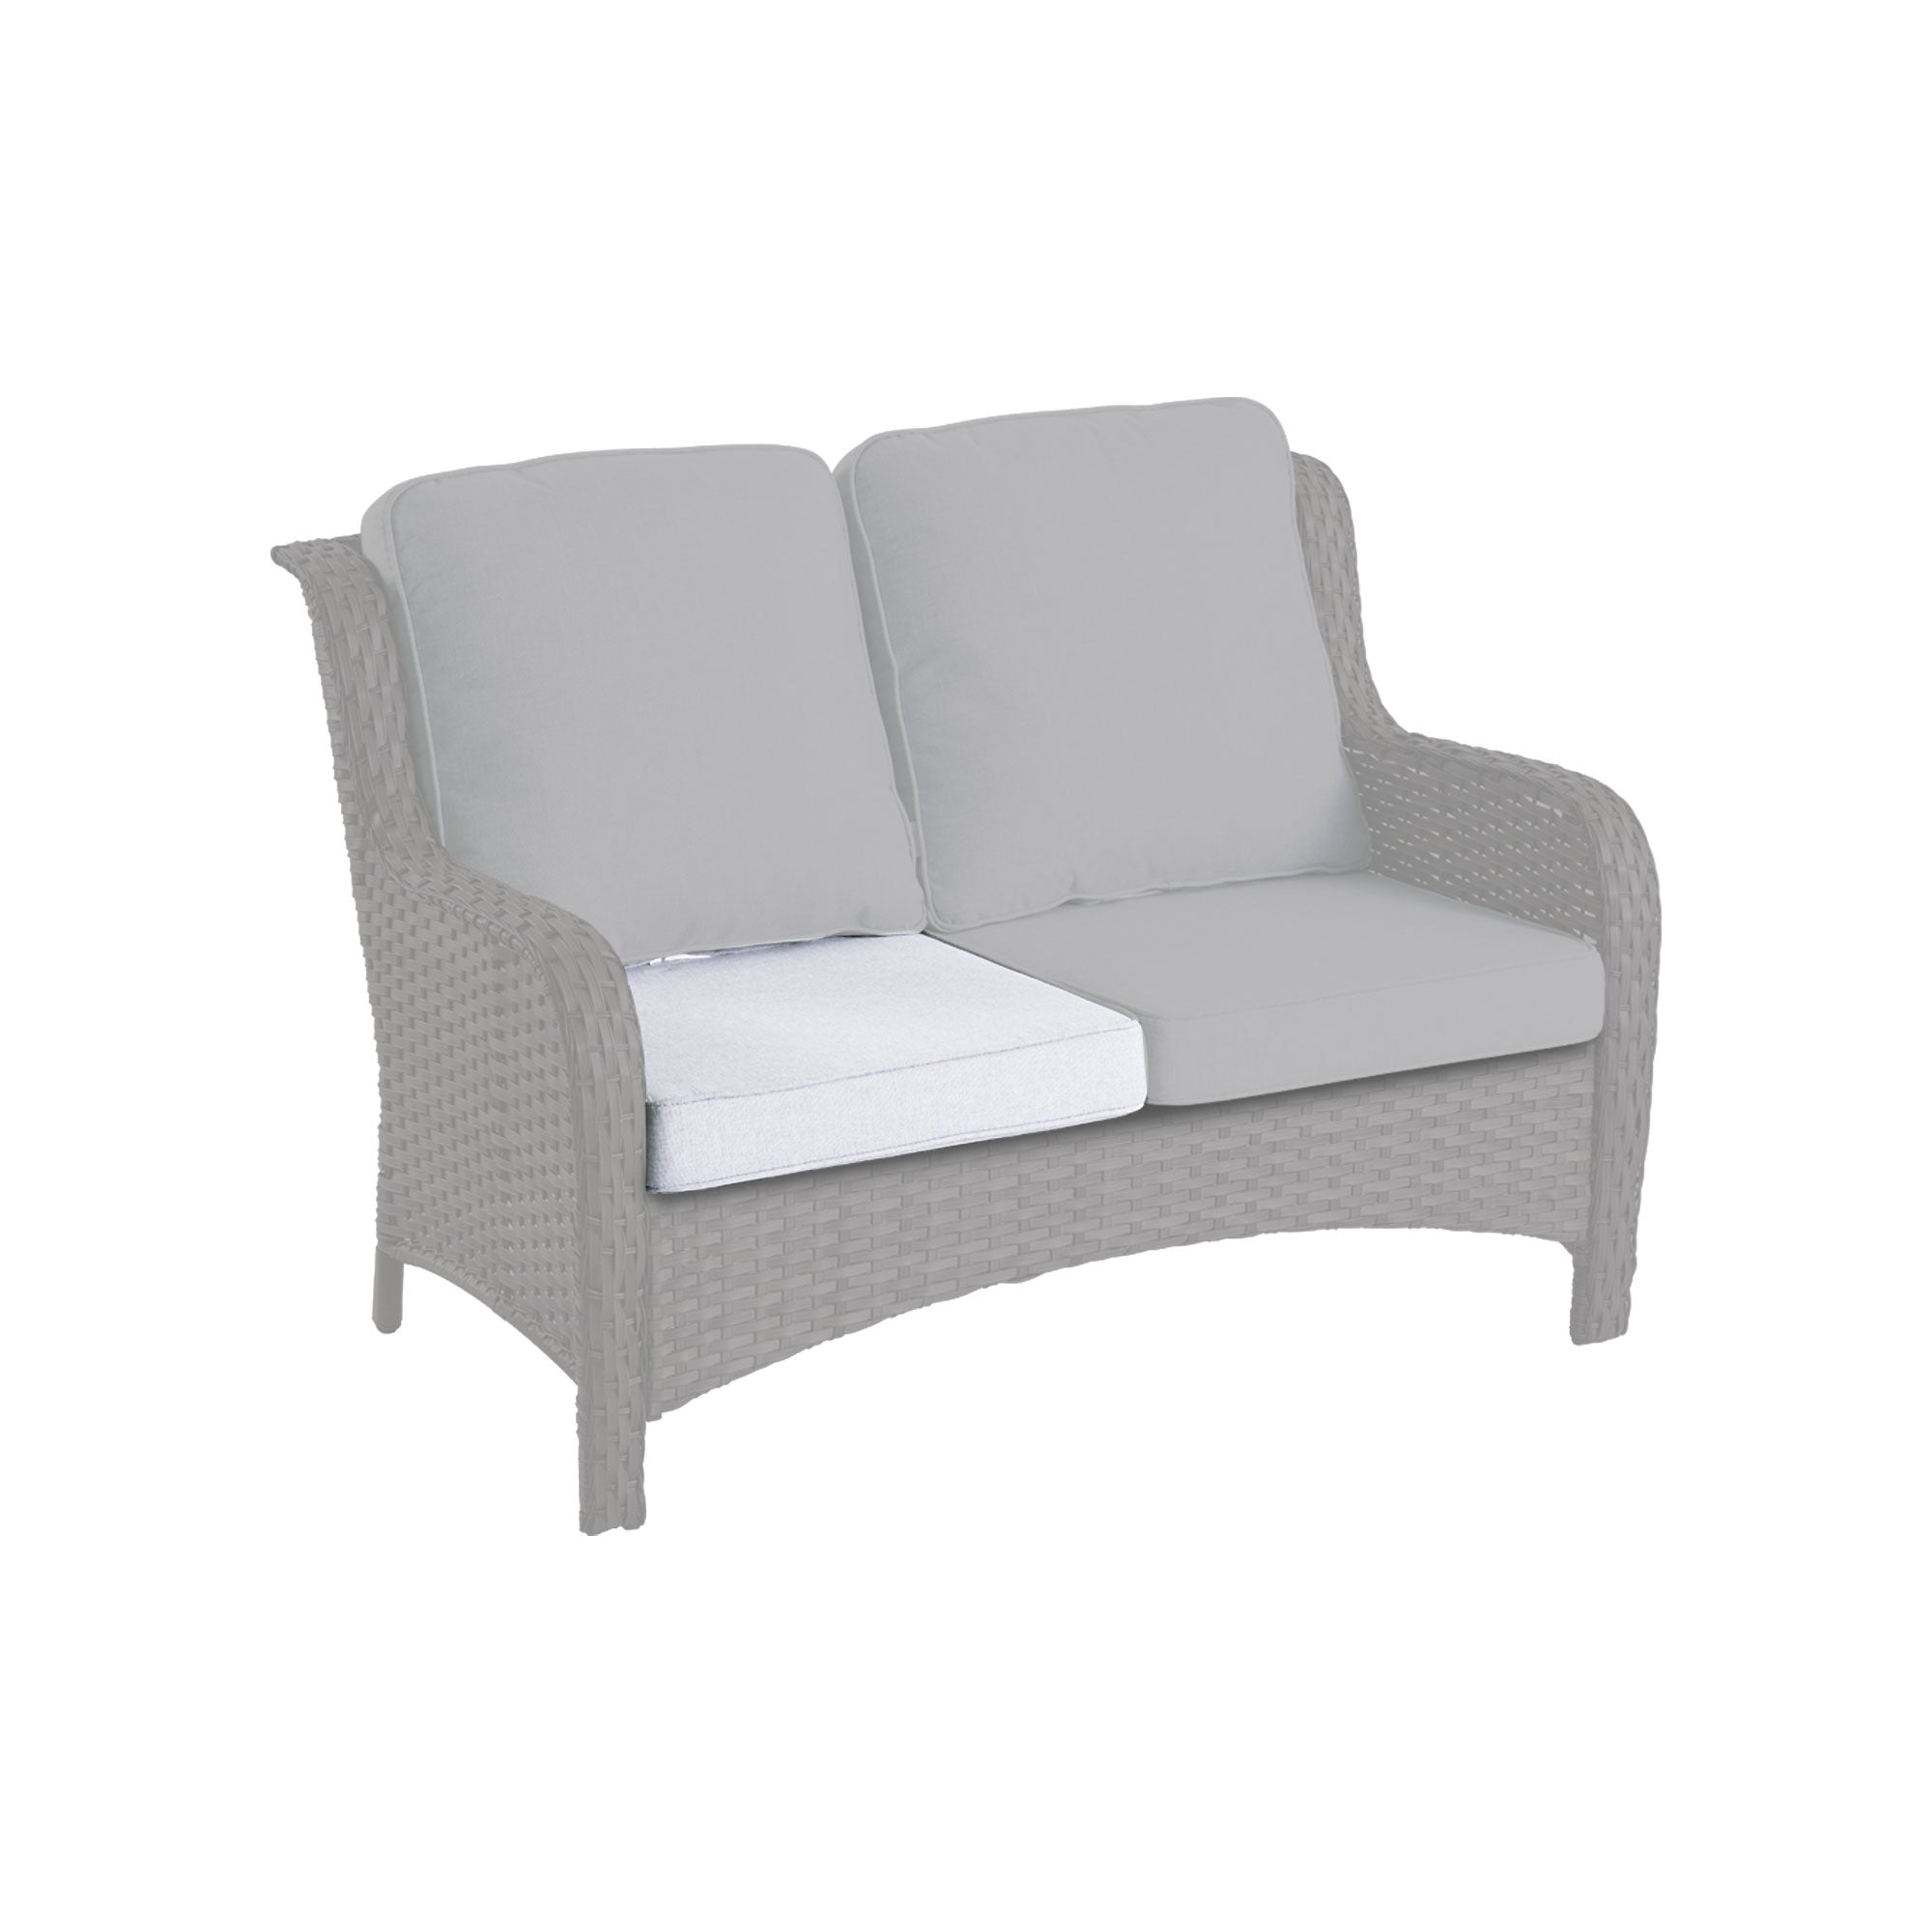 Ovios Kenard Series Replacement Seat, Back Cushion (Refer to the Dimension in Description,Only cushion)